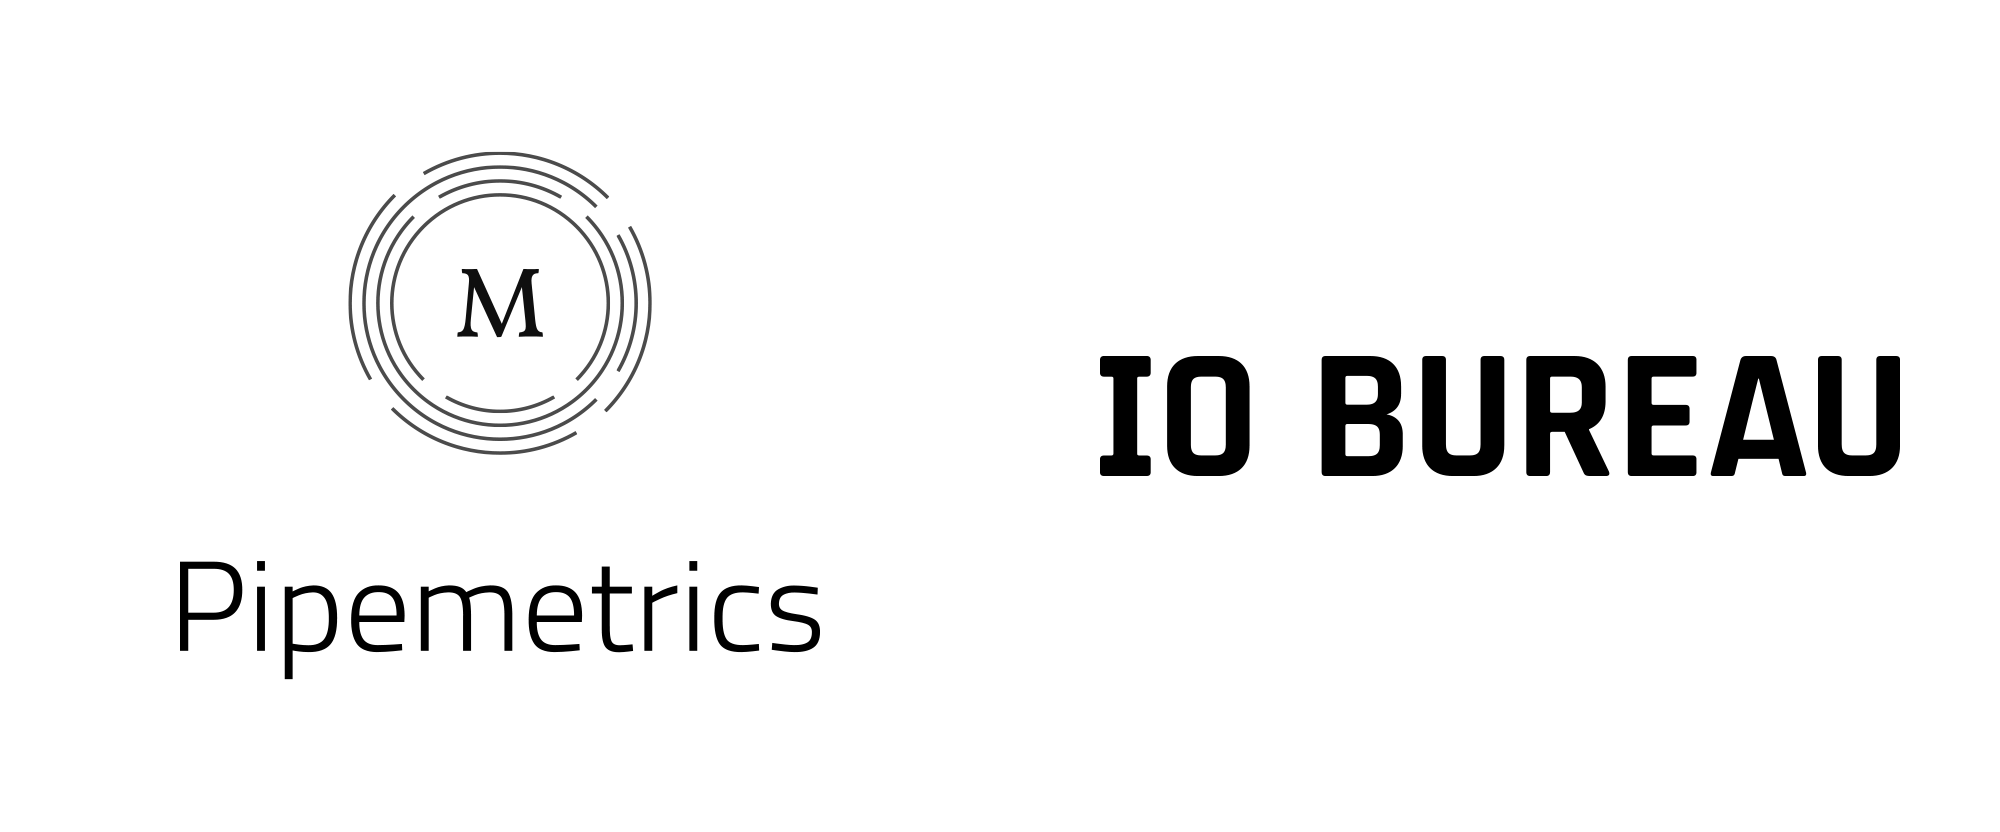 New Name and Logo for IO Bureau done In-house